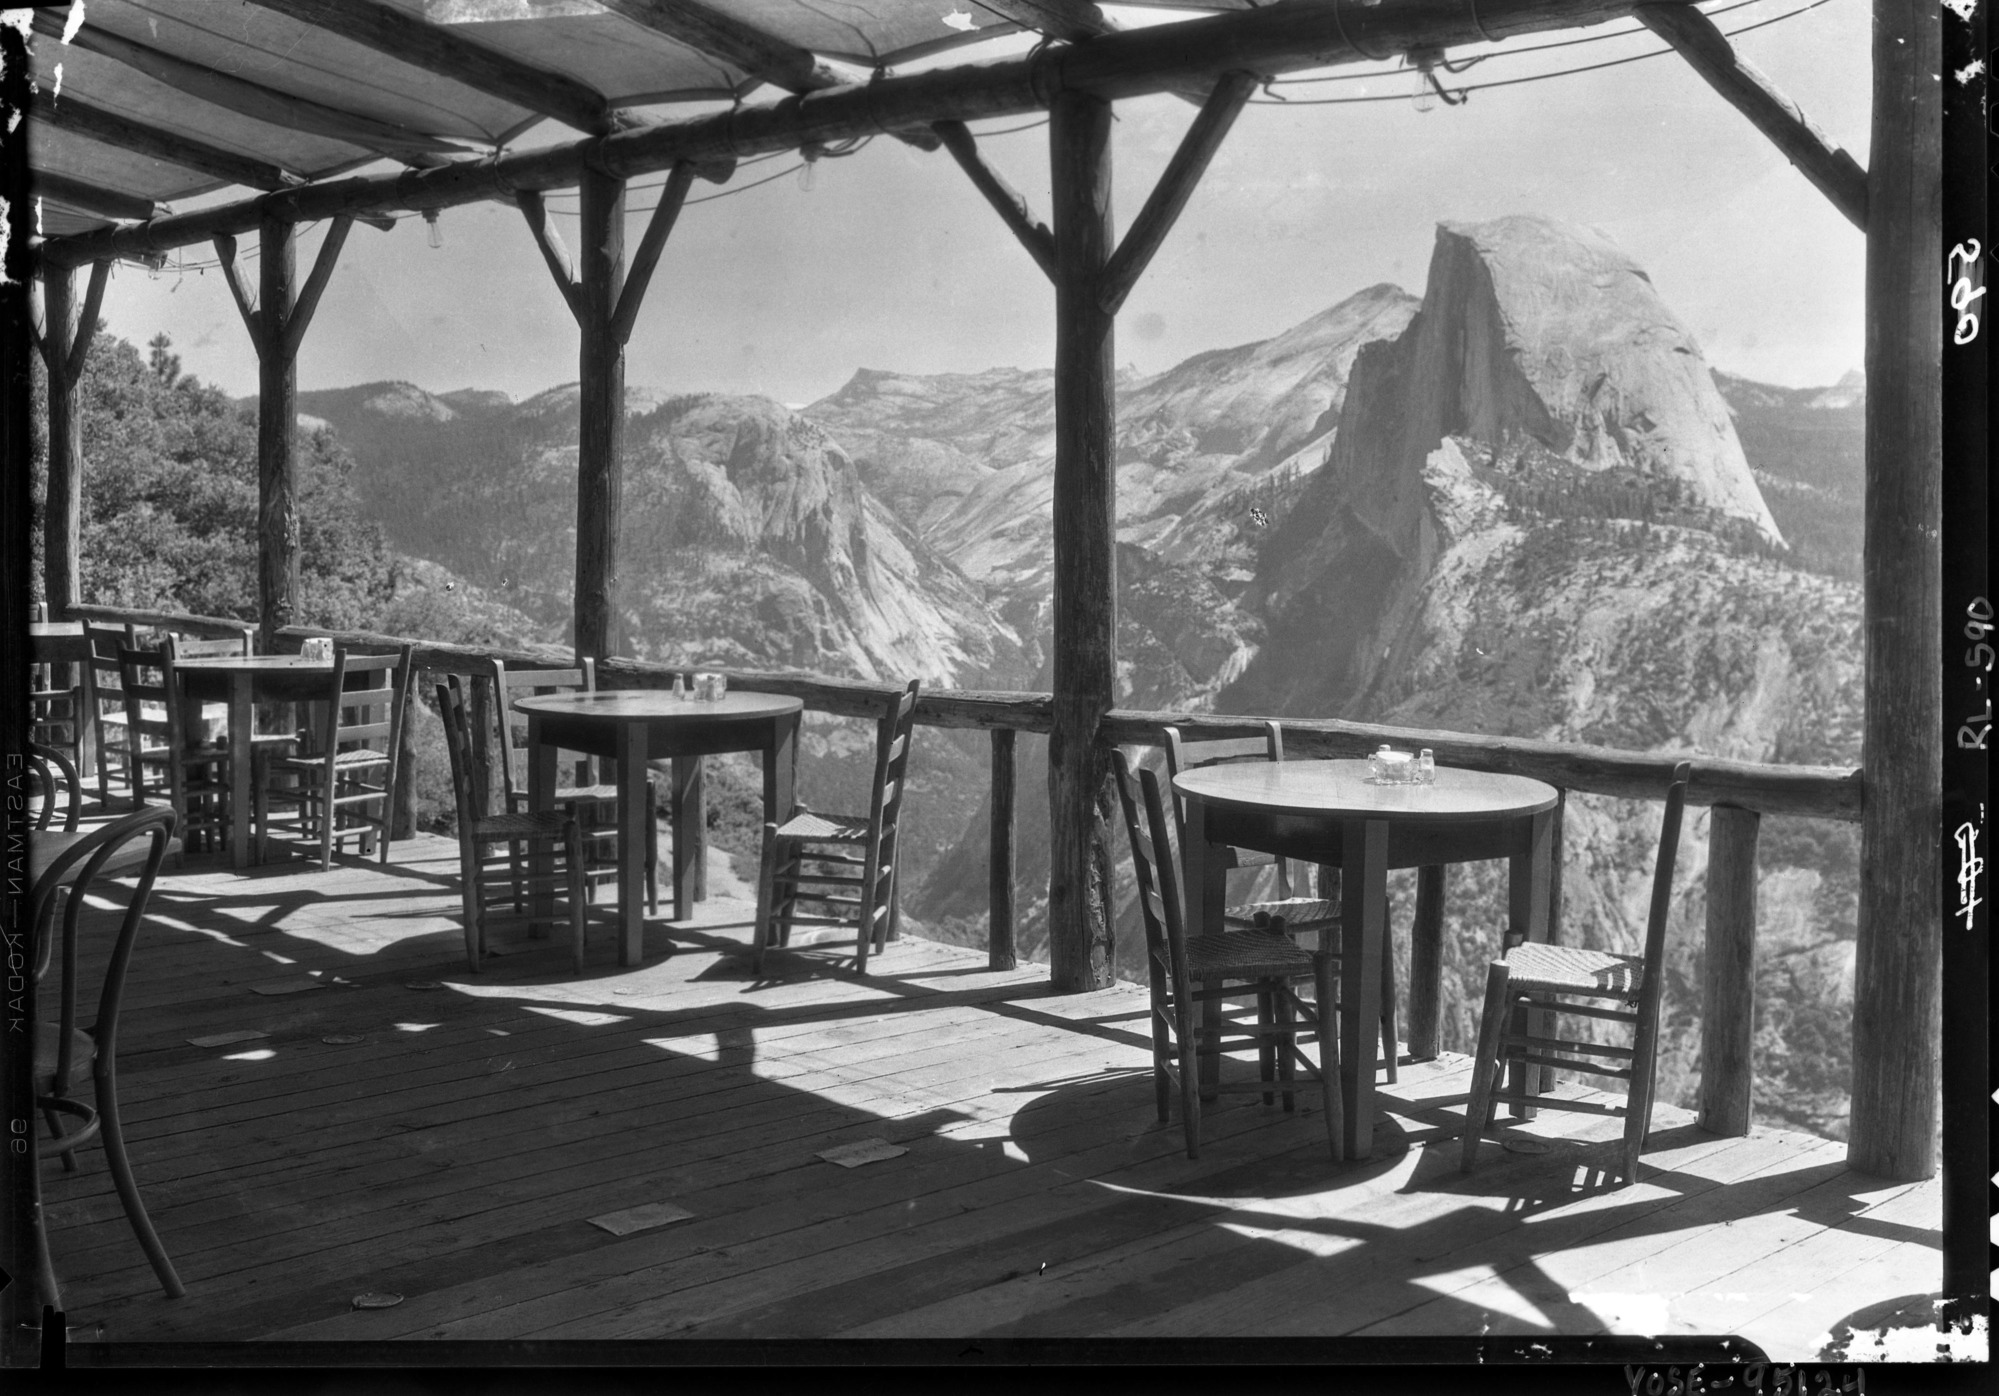 Scene from Glacier Point Cafeteria.